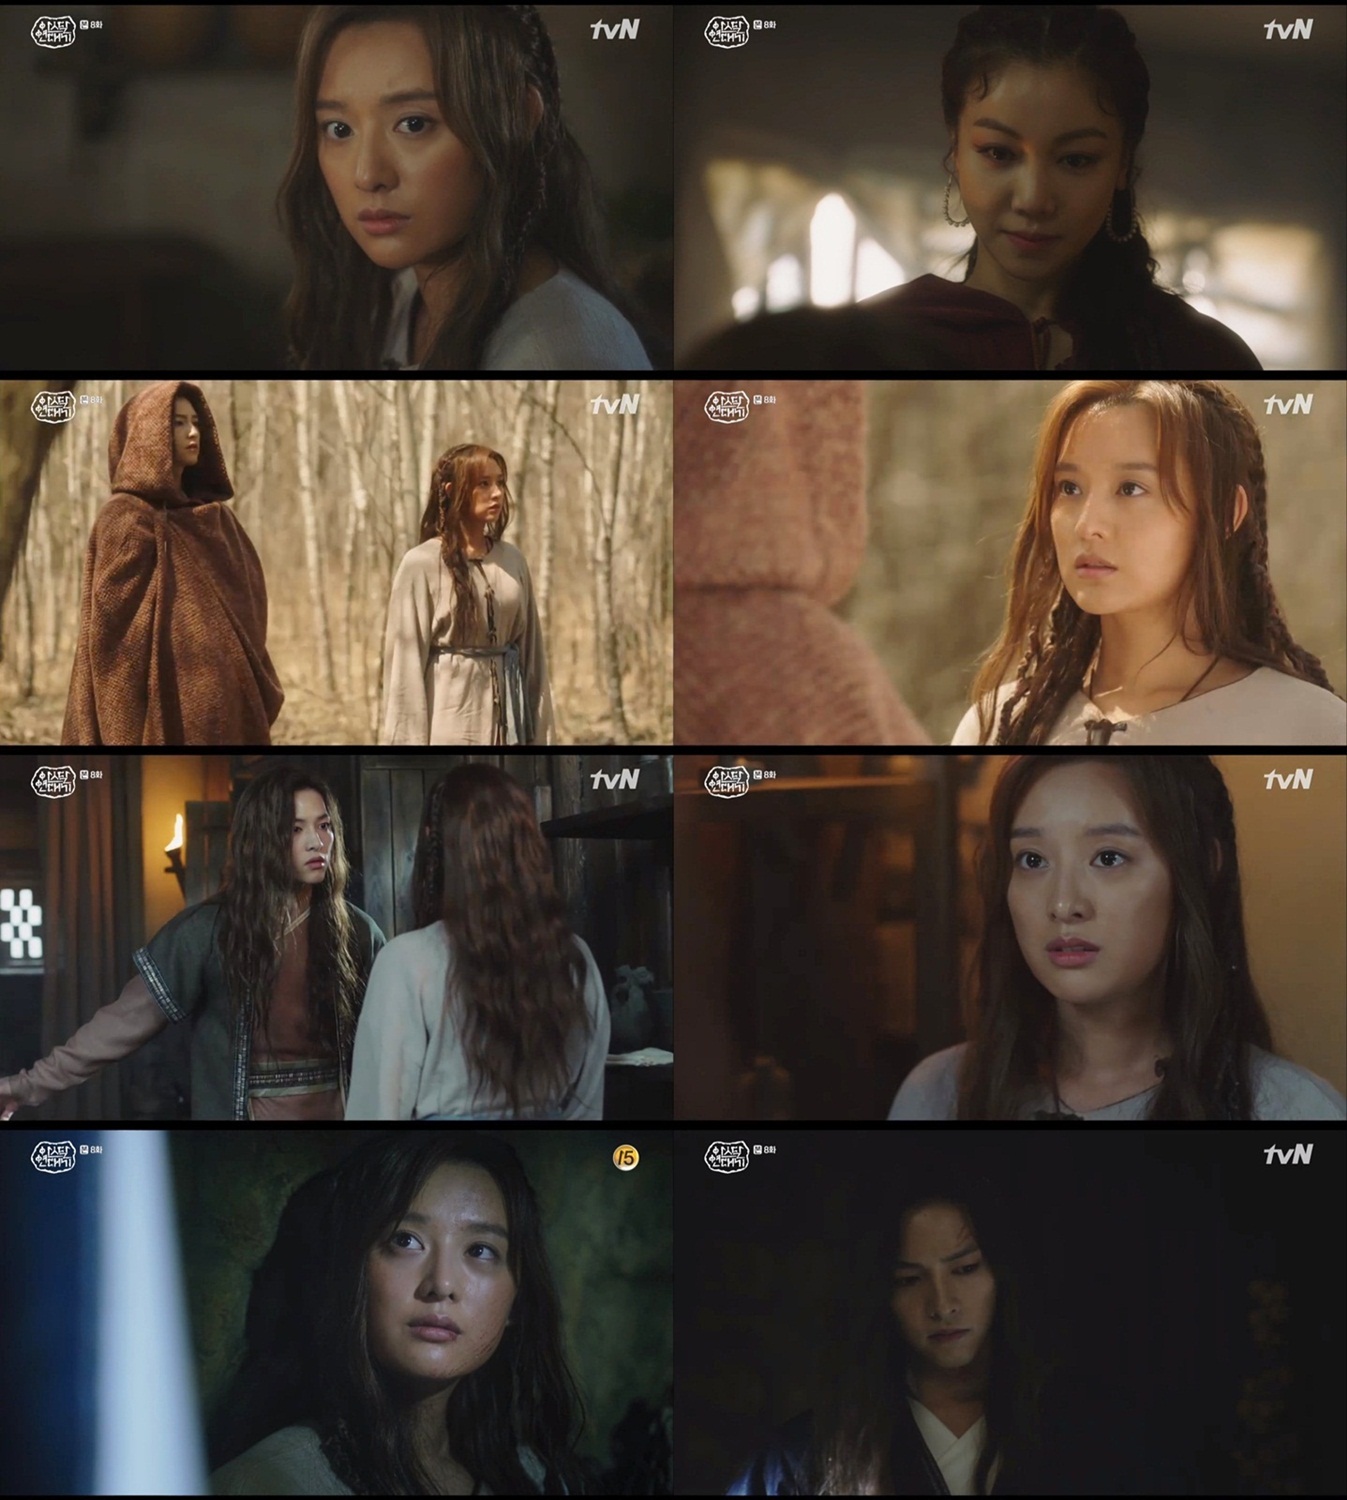 Kim Ji-won, the Asdal Chronicle, awakened properly and gave a chewy tension to the drama.In the 8th episode of the TVN Saturday drama Asdal Chronicle broadcasted on the 23rd, Kim Ji-won divided into the successor of the clan mother of the Wahan who was taken to Asdal.Tanya reunited with her father, Yeolson (Jung Seok-yong), thanks to Saya (Song Joong-ki), but for a moment of joy, Tanya heard that the silver island (Song Joong-ki) was dead.Tanya then smiled unknowingly and thanked Saya, surprising the people around her, not the general response of someone who knew the death of her heart.However, when Saya reminded her of the death of the silver island, Tanya, who denied reality, gradually became emotional and hit Saya with a evil I did not die!Tanya, trapped in a warehouse, recalled the past with the silver island and realized his death. Tanya was sorry for saying, I killed you.He asked Saya, who came to the warehouse, as if he had resigned everything, saying, Why should we suffer this pain? And Saya replied, I will not know if I have strength and I do not get to such a place where I am hungry.Im sorry, Im going to live, Ill go there, so Ill find out whats happened and Ill tell you someday, she said, her eyes blurring.Thanya, determined to have strength, suddenly changed her attitude 180 degrees to make Saya her first weapon, and then she knelt down and begged him for forgiveness.I order you. I want you to know who will be the owner. Take my order, Saya. On this day, Kim Ji-wons Awakening Ending brought a chewy tension to the house theater, raising the storys suction power.He not only painted the feelings of the dramatic changing Tanya, such as shock - anxiety - sadness, but also made it impossible to take his eyes off, perfectly expressing the appearance of Tanya, which was significantly different from the end of the play.So, expectations are high for the exciting story of Tanya that Kim Ji-won will unfold.Meanwhile, Asdal Chronicle is broadcast every Saturday and Sunday at 9 pm.Photo = TVN broadcast screen